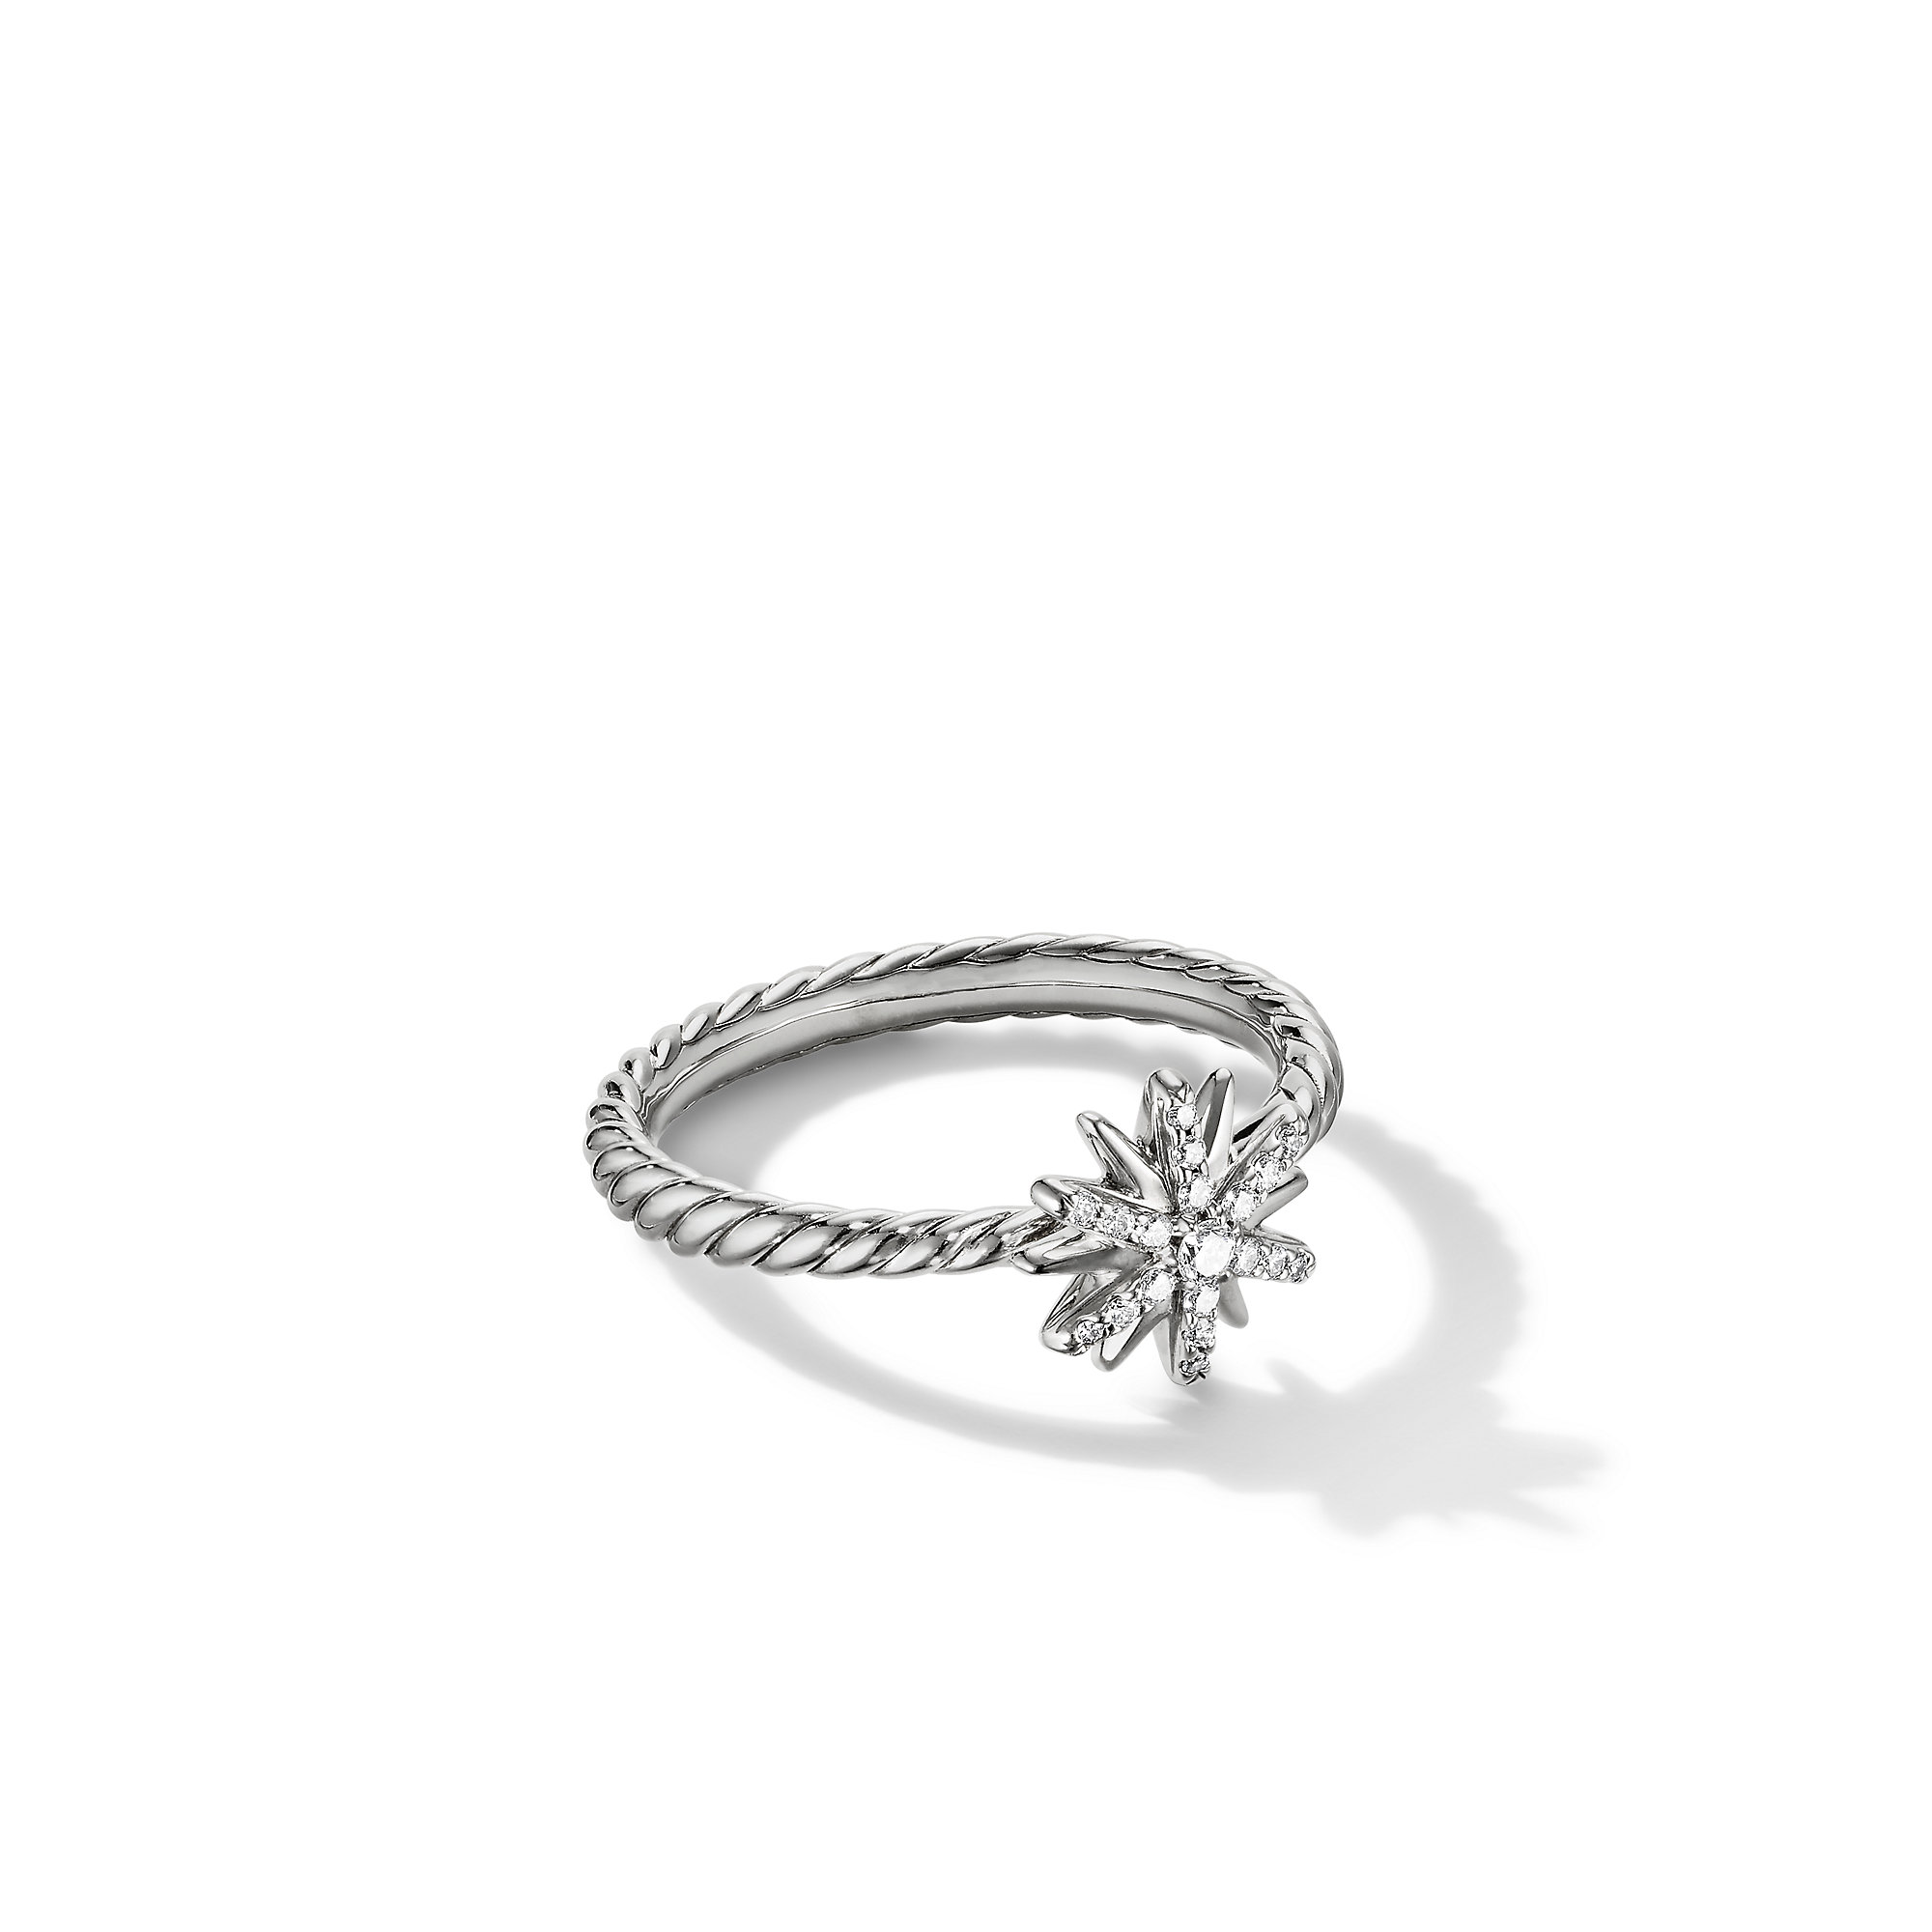 Petite Starburst Ring in Sterling Silver with Pave Diamonds